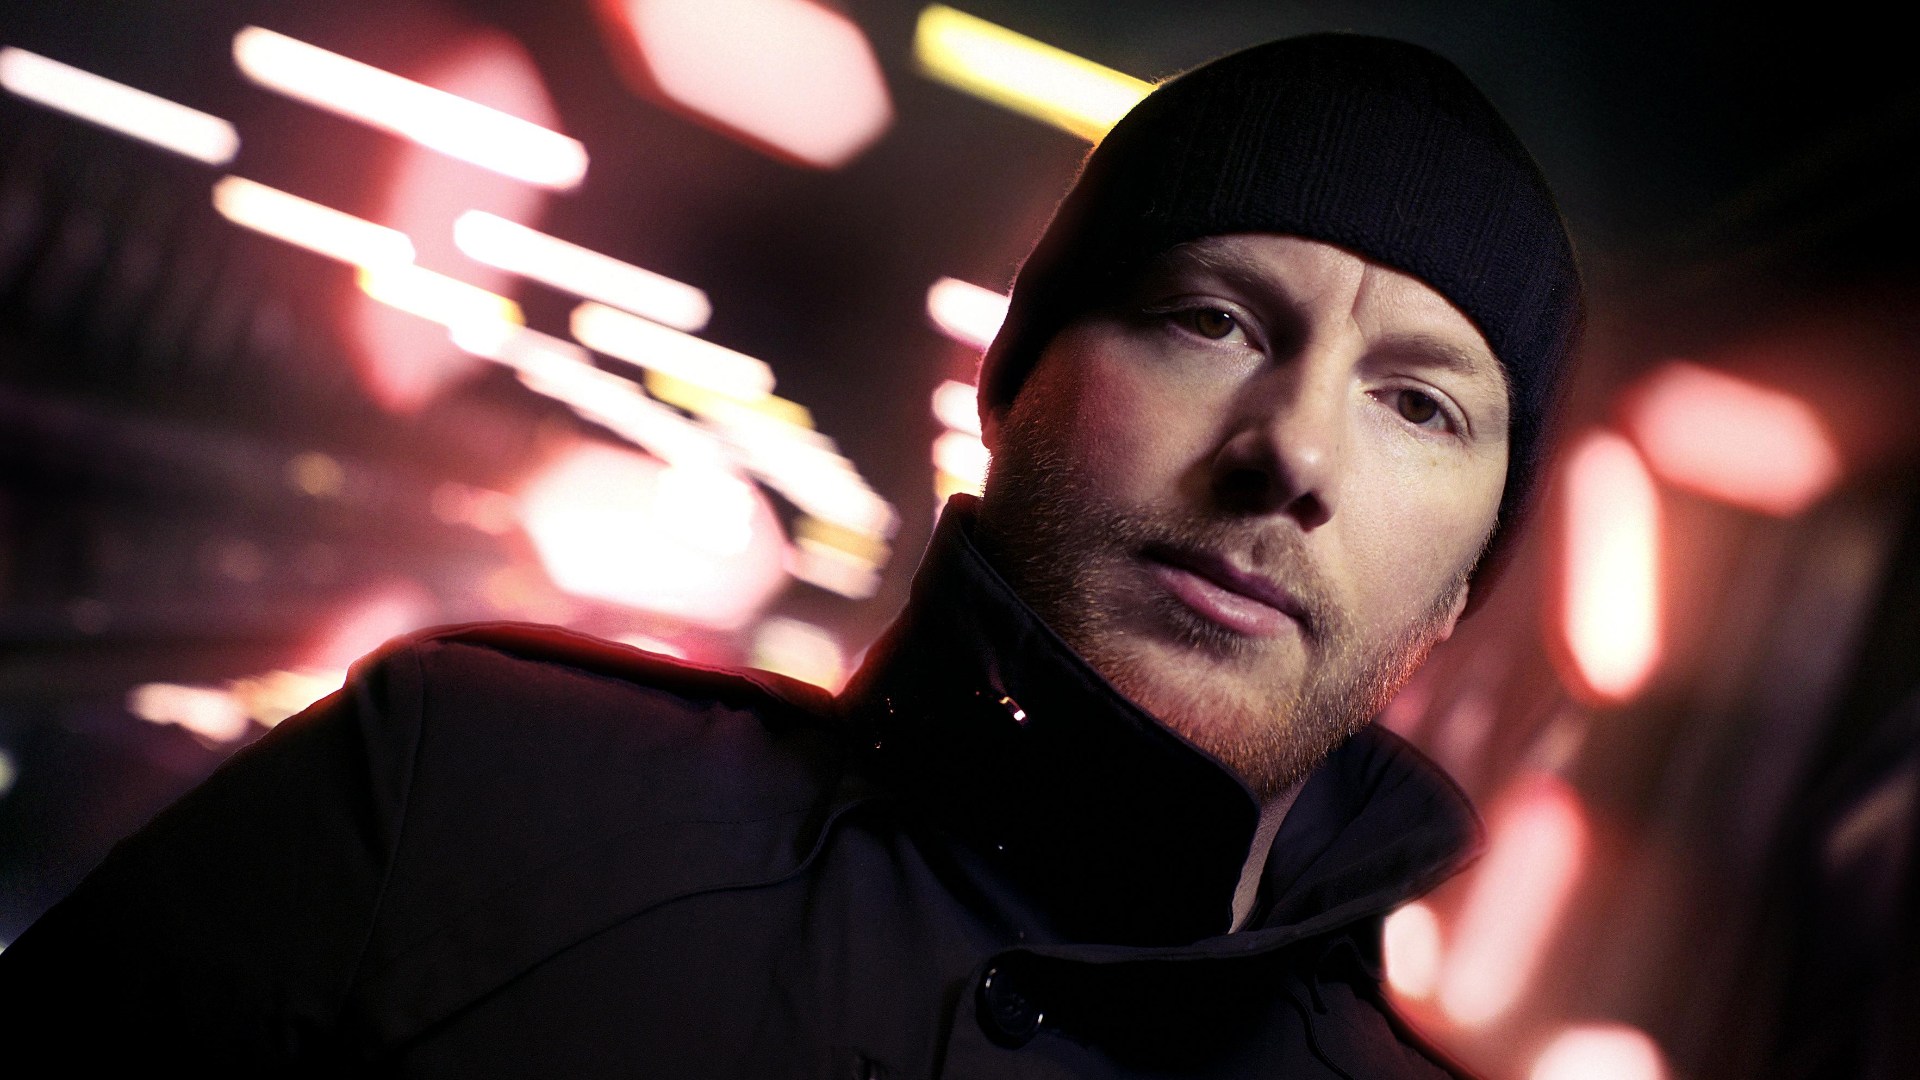 Eric Prydz teases a preview to his upcoming EP!